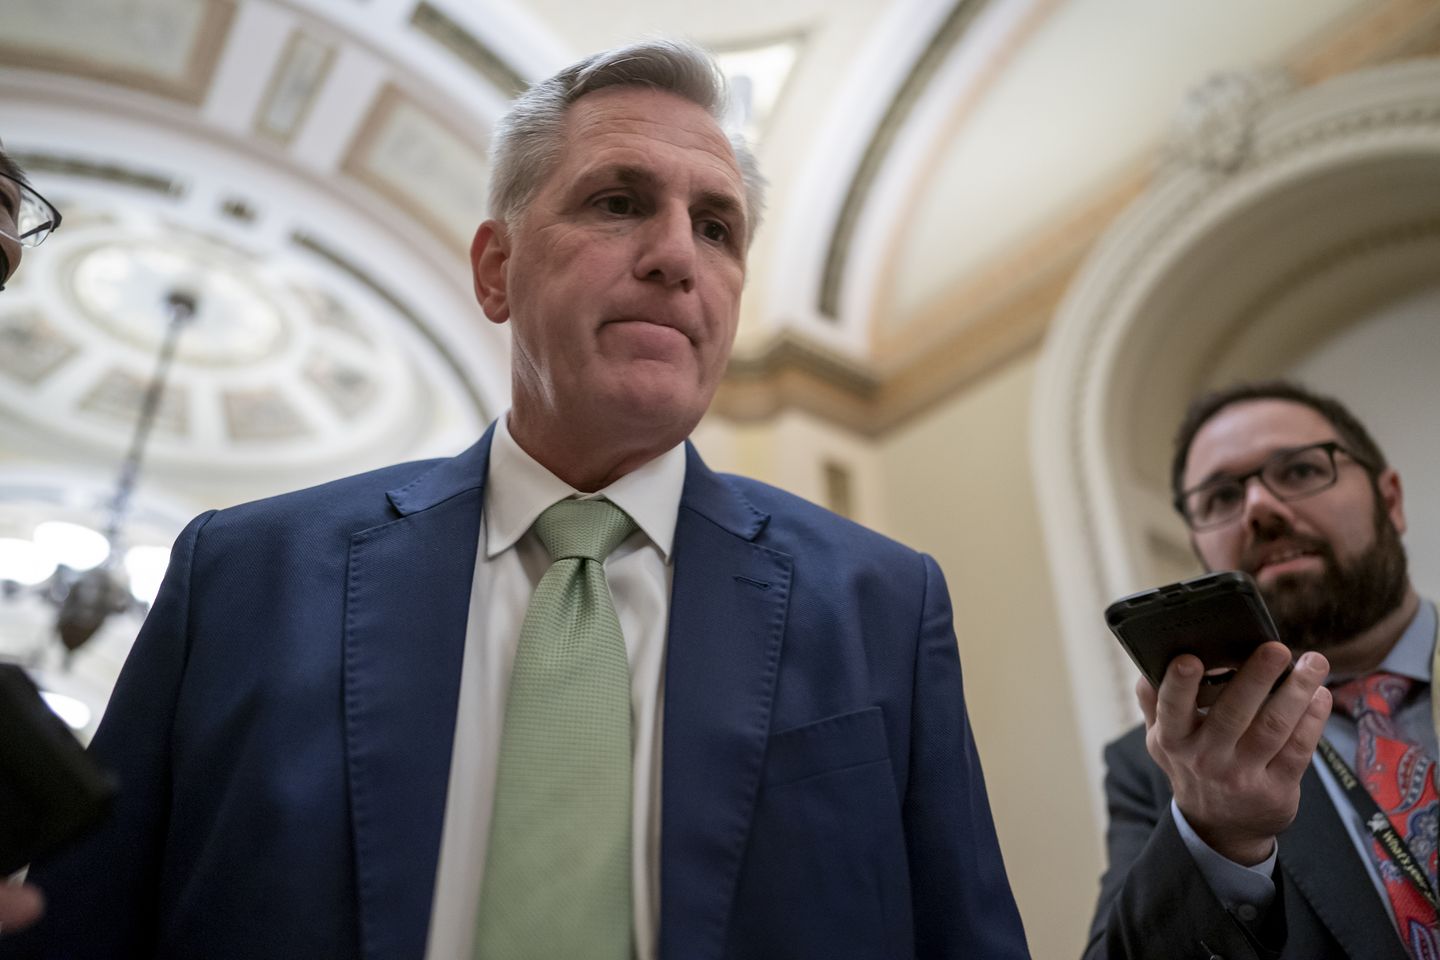 Kevin McCarthy speaker aspirations face doubts after leaked audio of him suggesting Trump resign